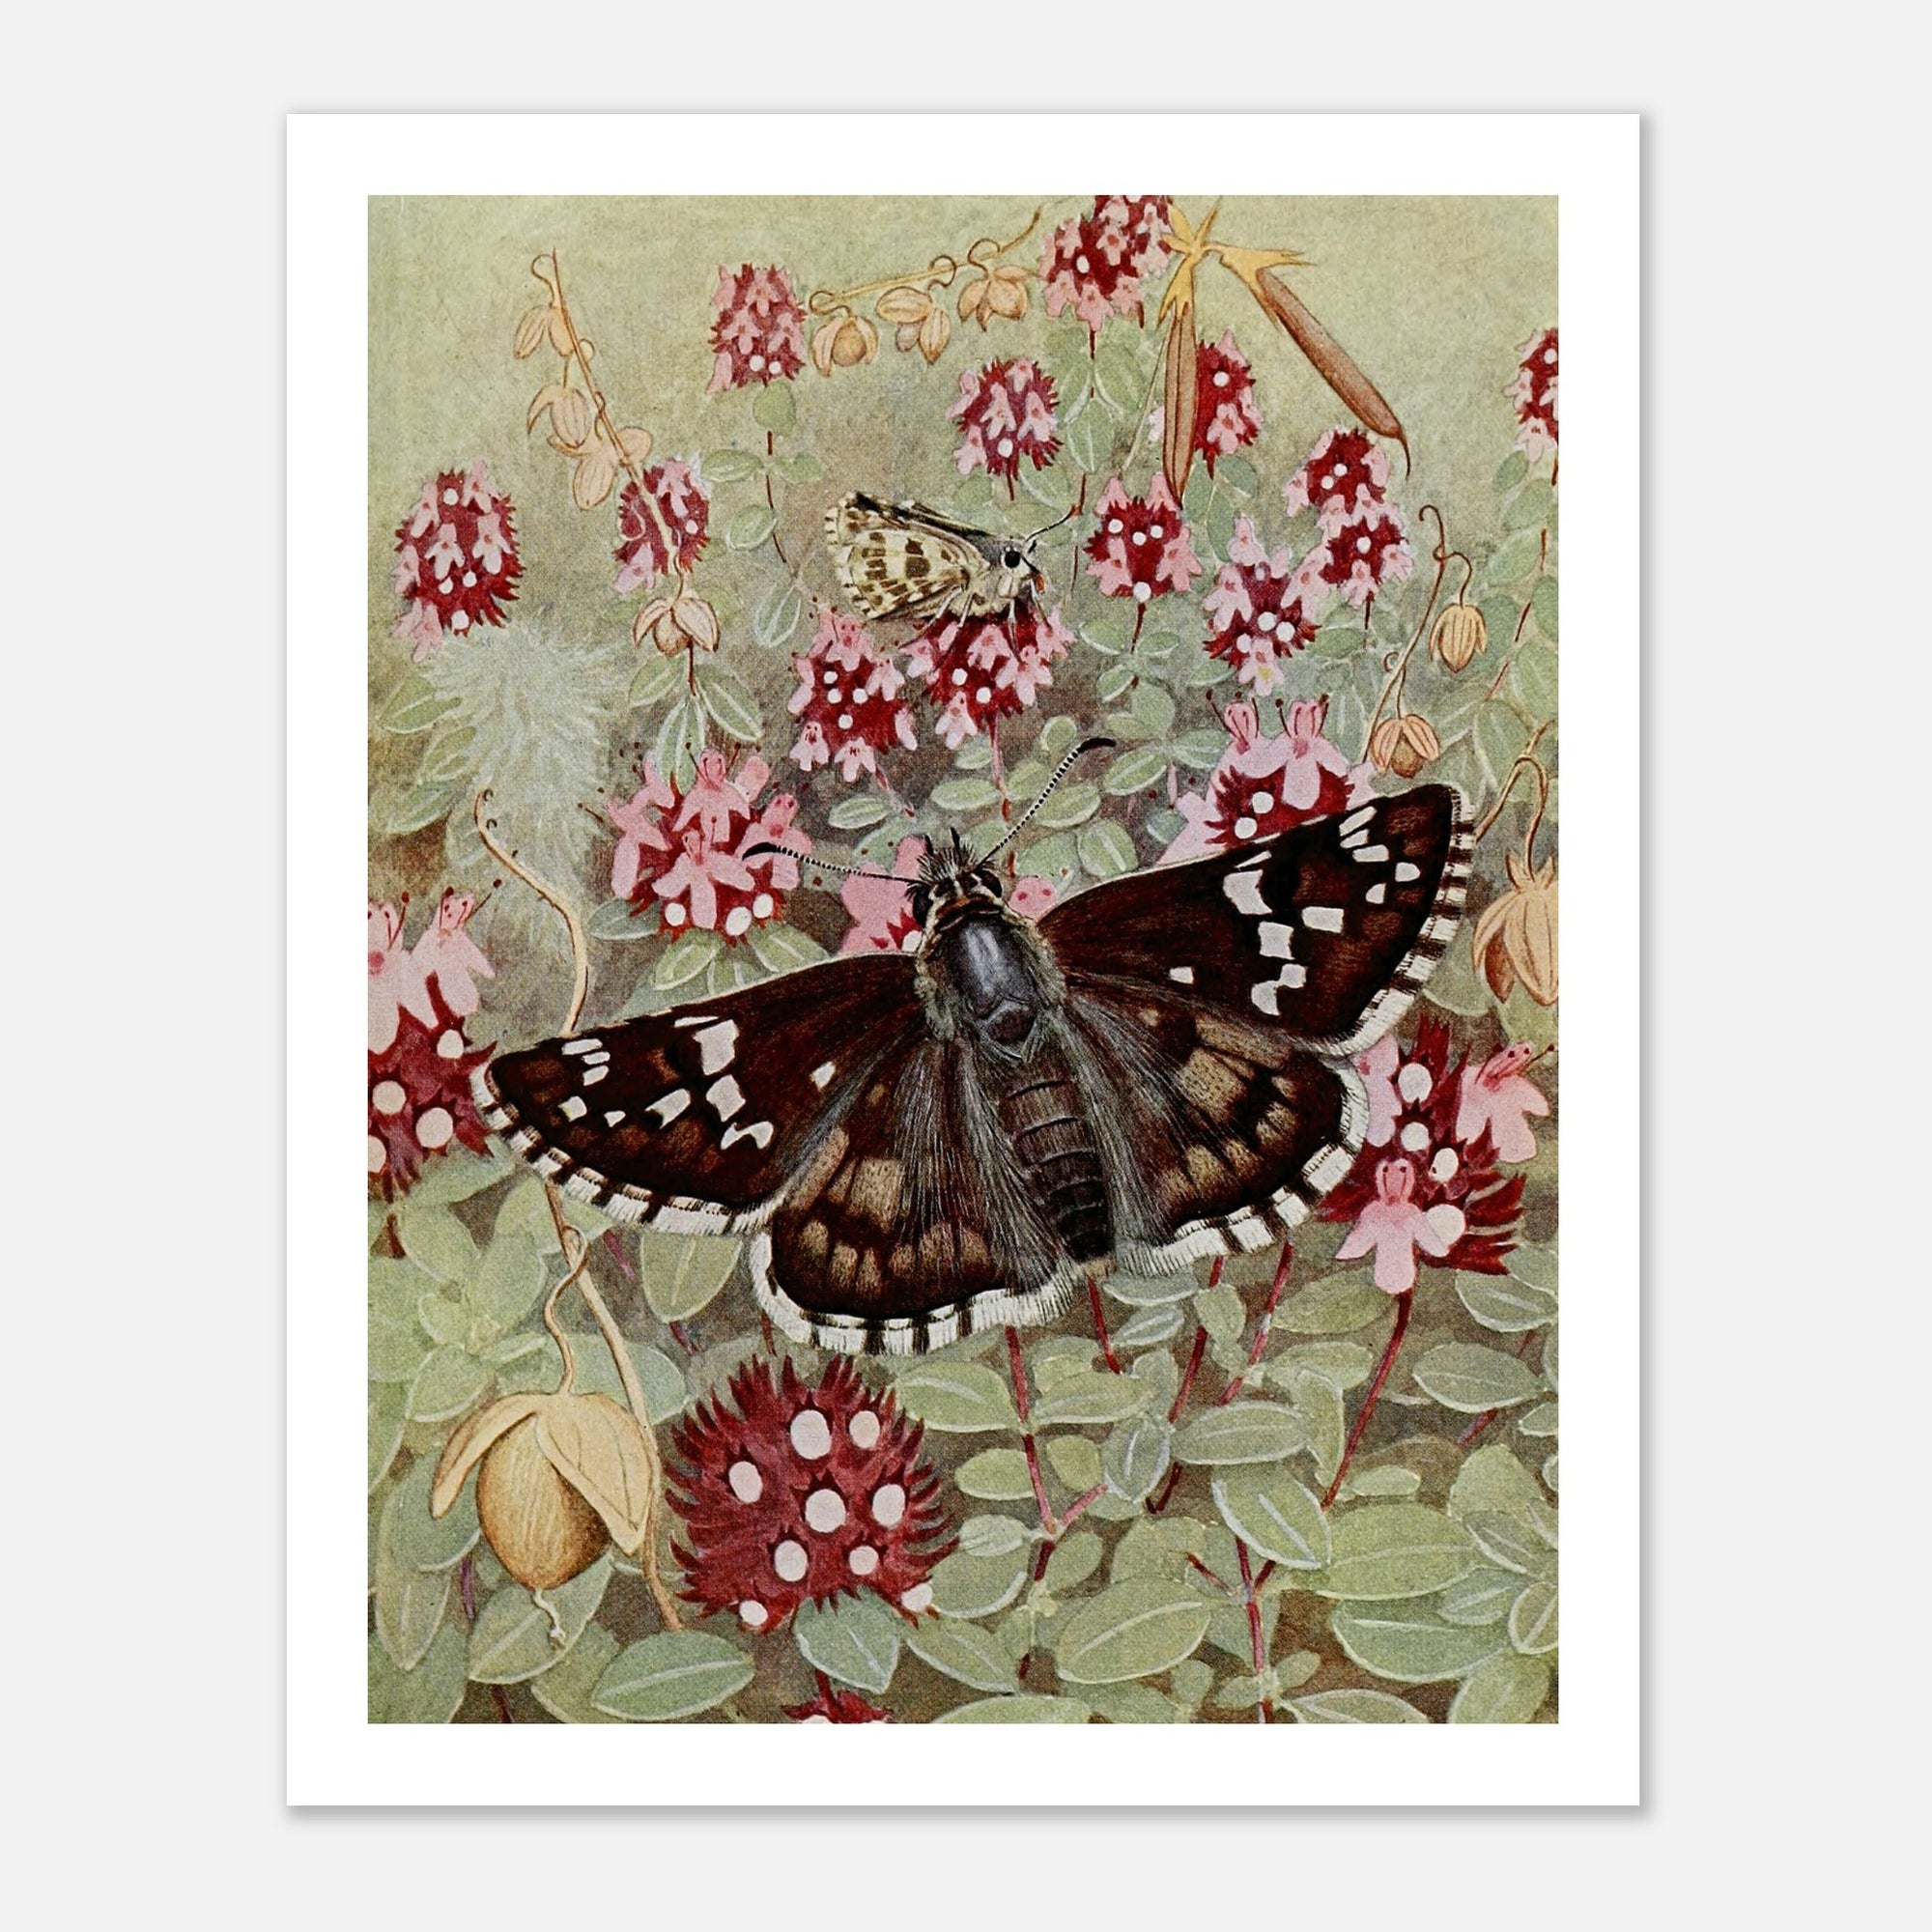 moth illustration with pink and red flowers and leaves art poster